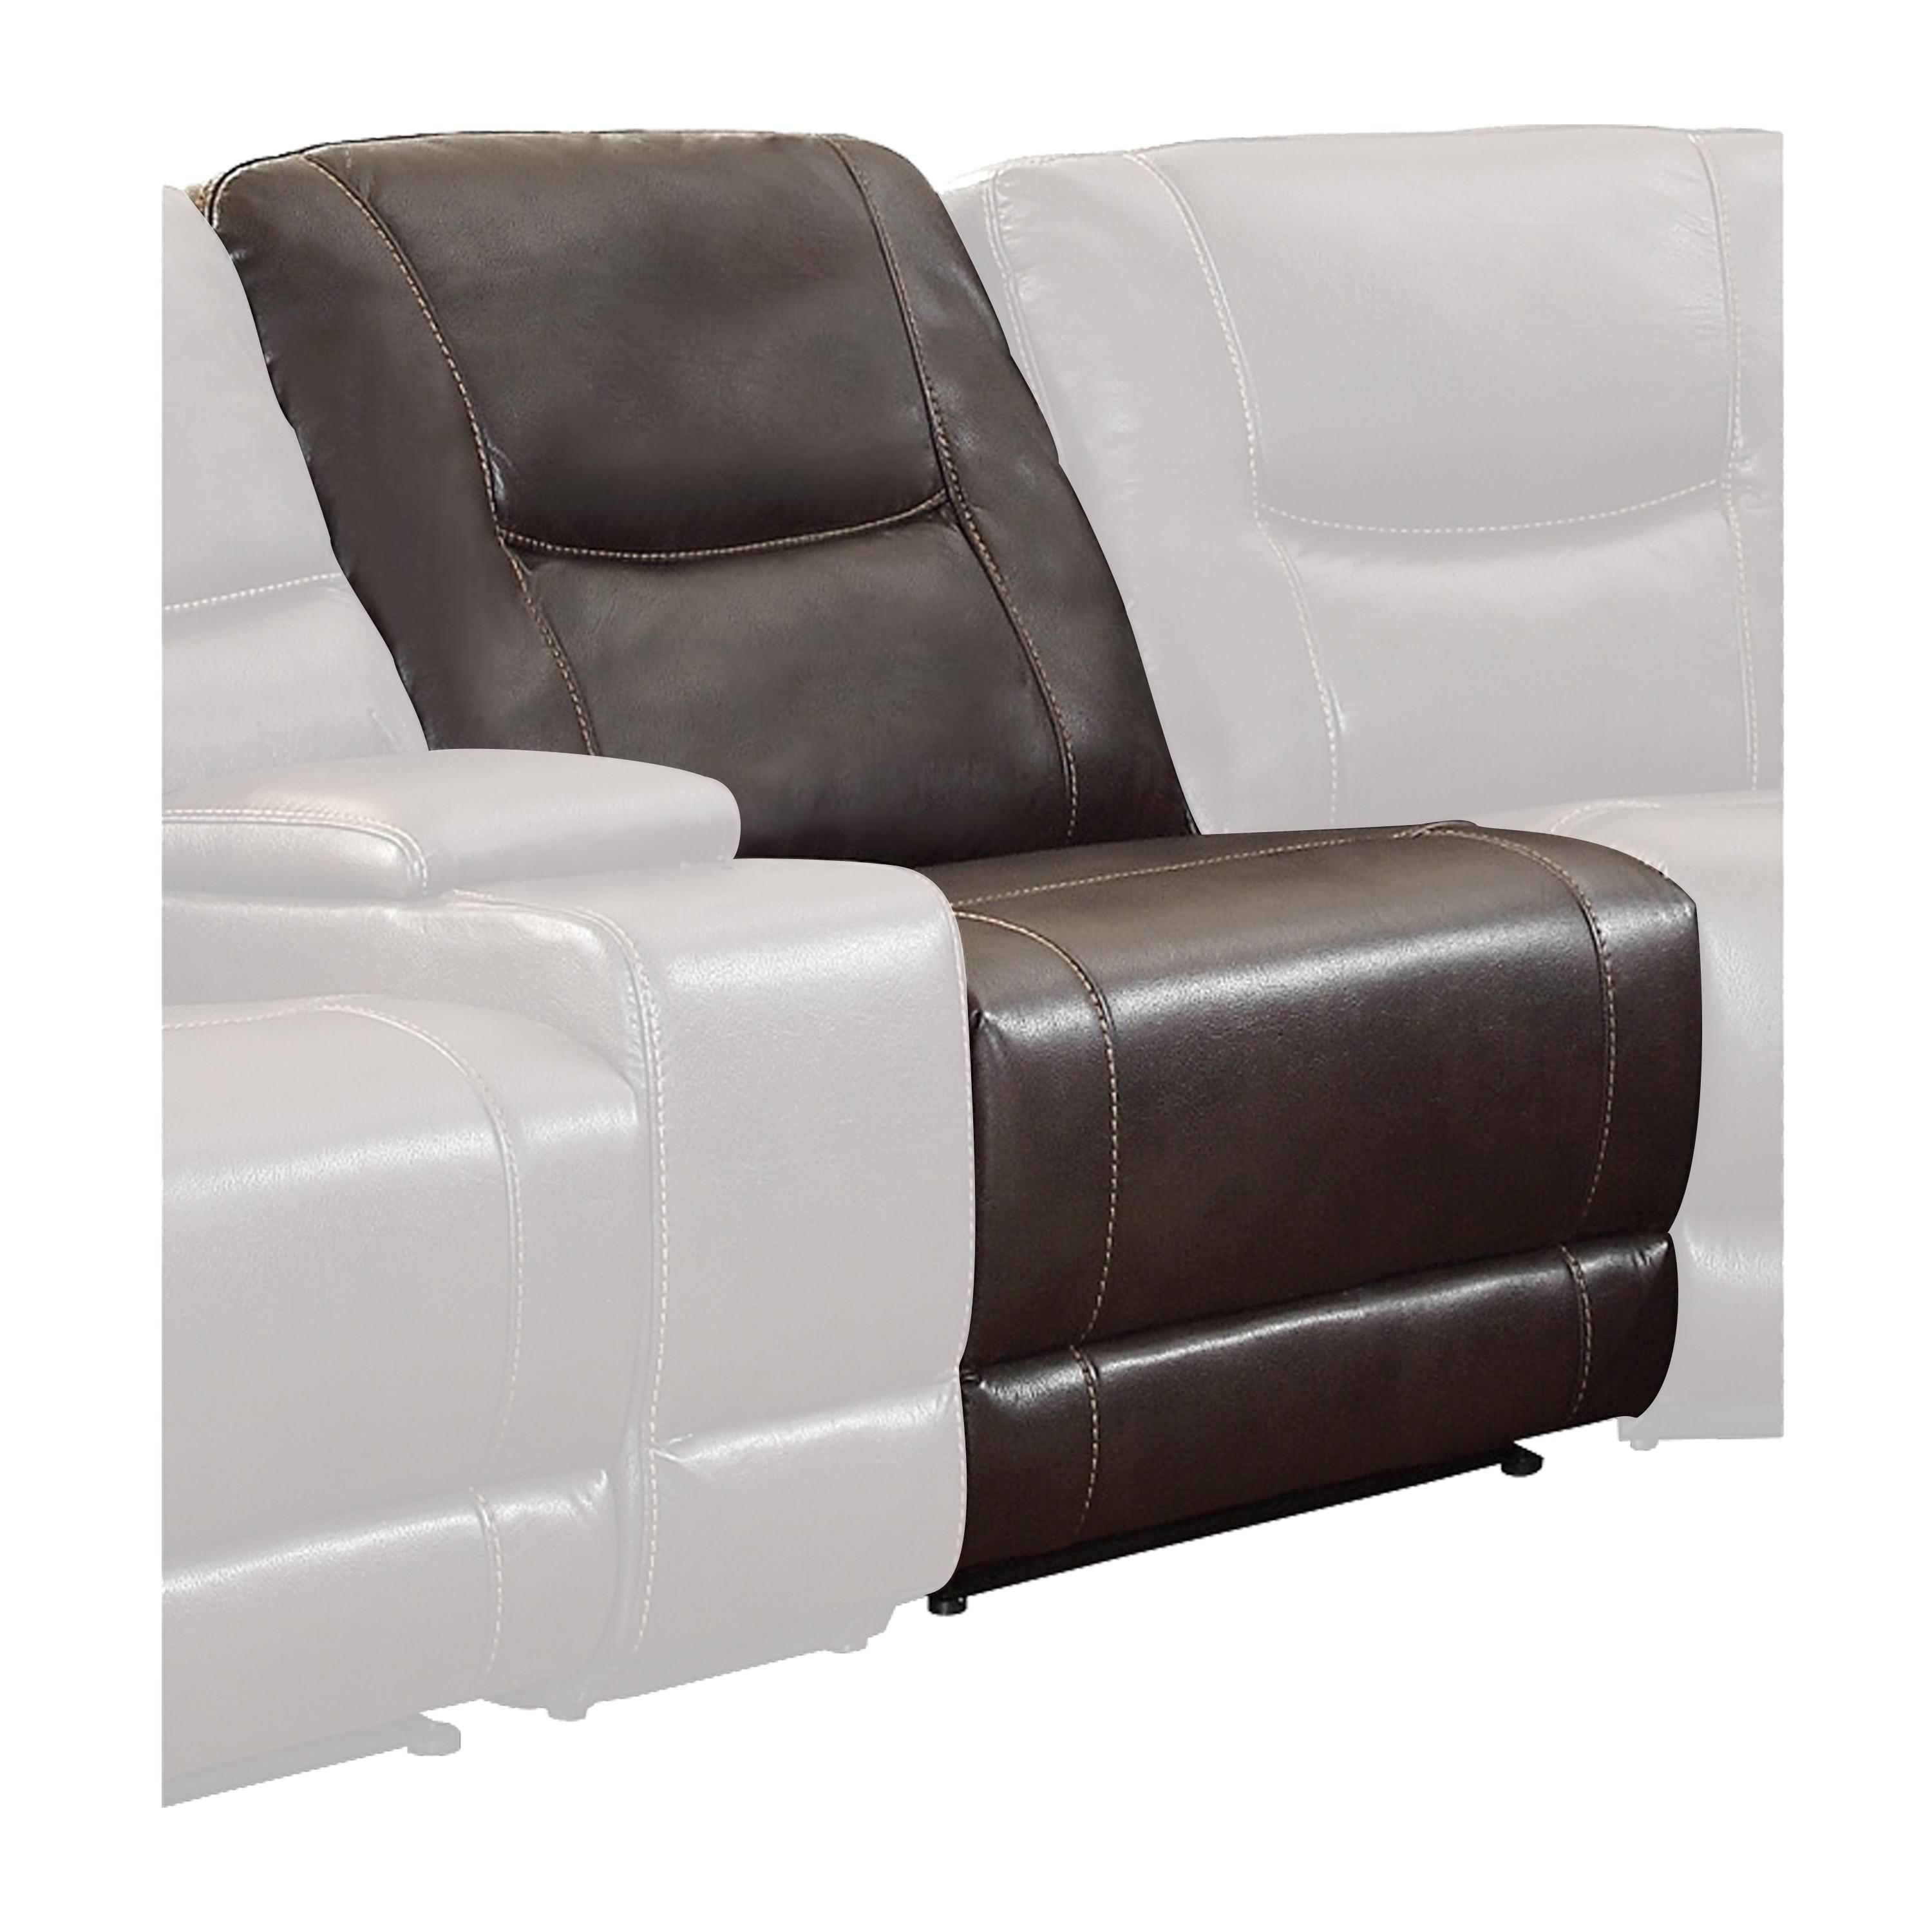 Modern Armless Chair 8490-AC Columbus 8490-AC in Brown Faux Leather